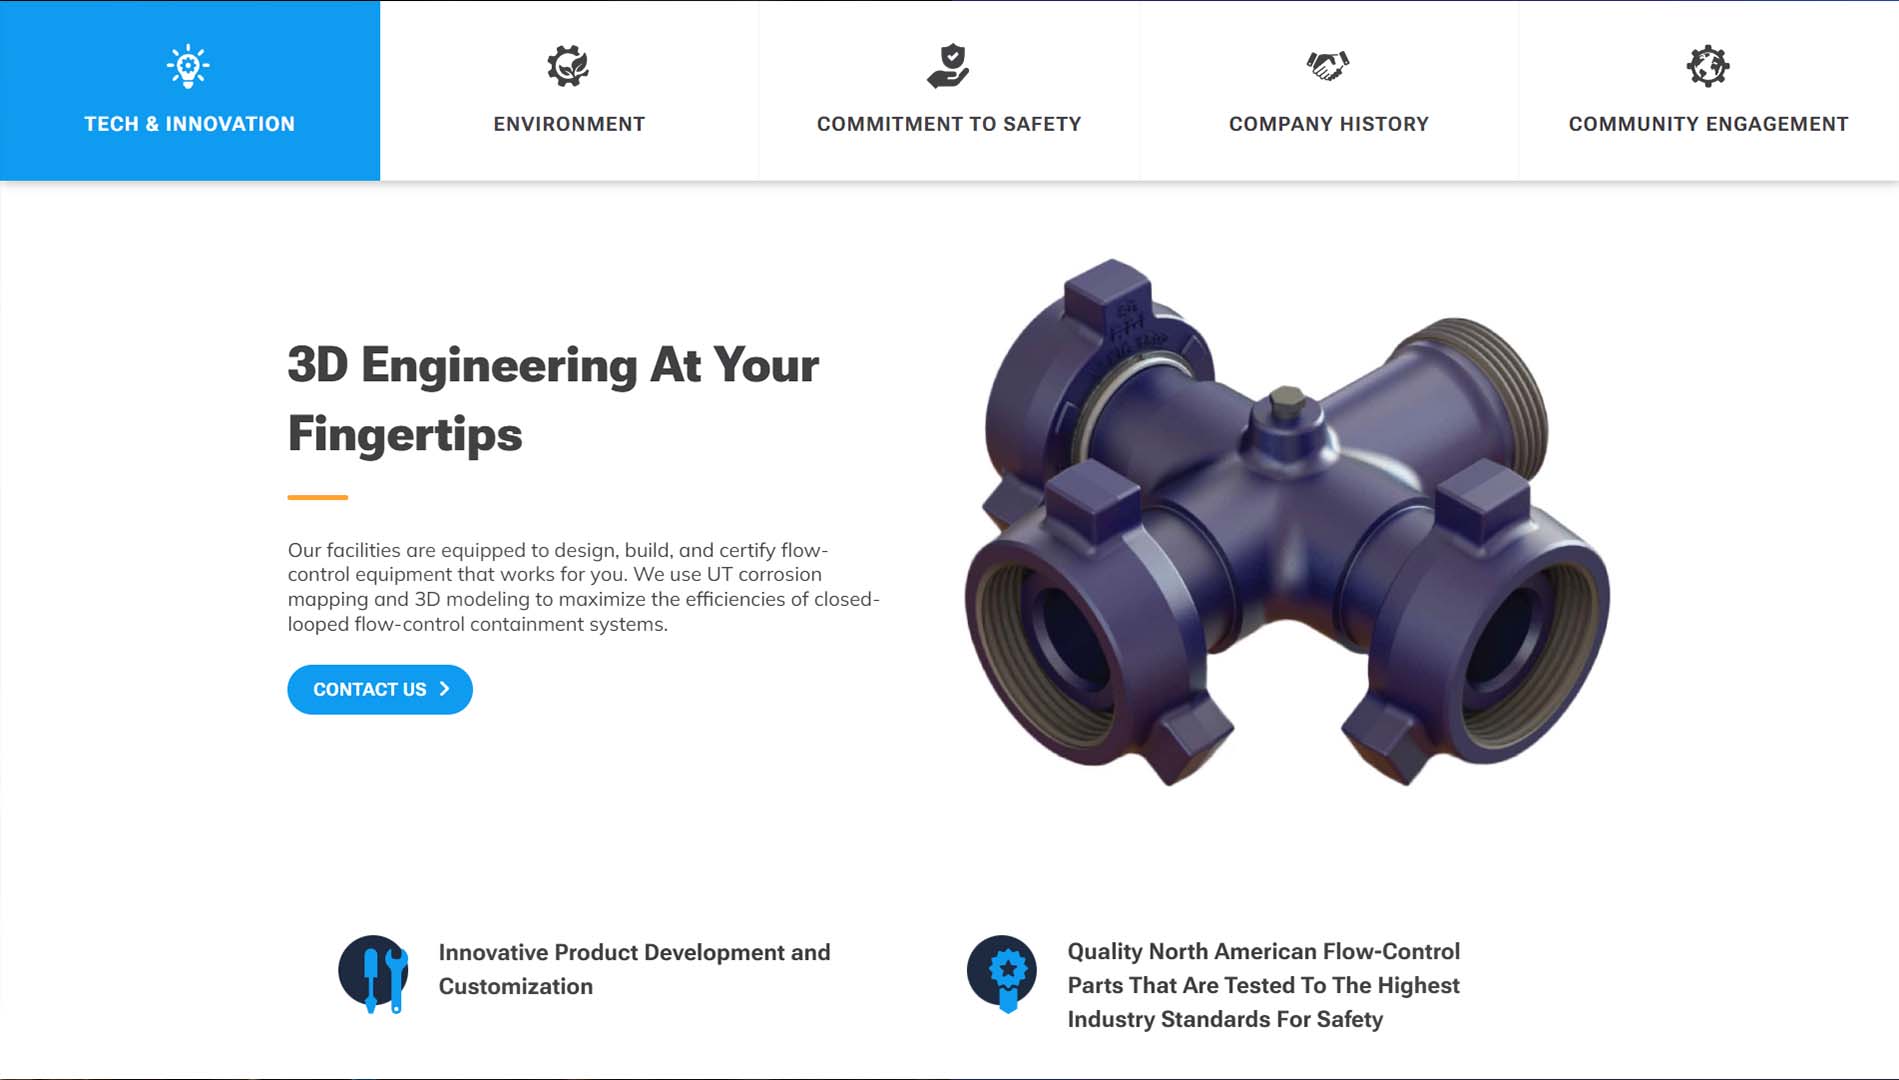 Web page section from RDI highlighting '3D Engineering At Your Fingertips' with a high-quality 3D rendering of a blue ball valve, emphasizing their technical innovation in flow-control equipment design, alongside navigation icons for tech & innovation, environment, safety, company history, and community engagement.